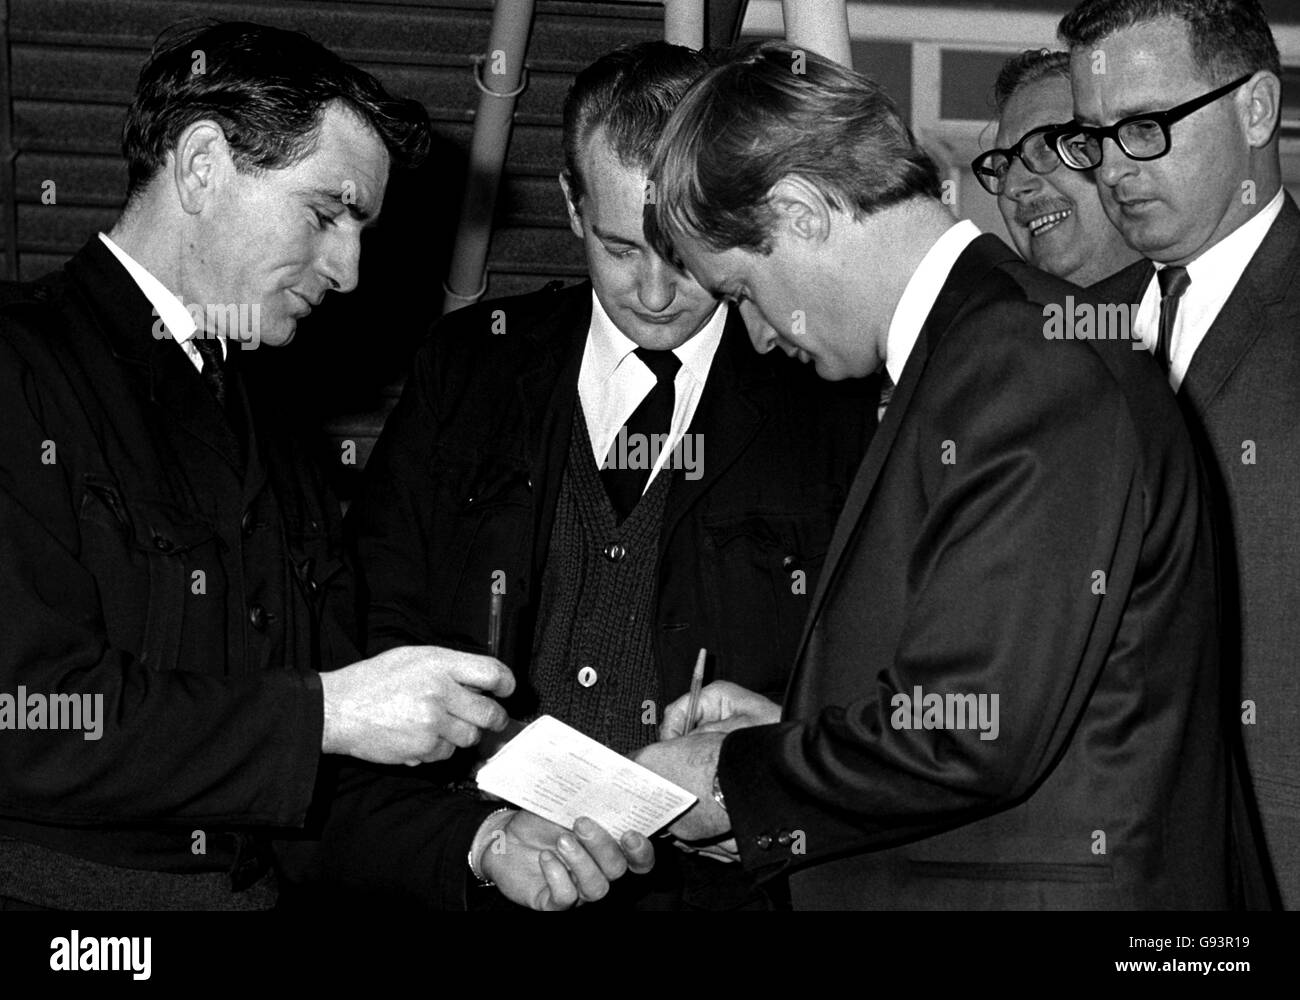 David McCallum who plays Illya Kuryakin in the BBC television series, 'The Man From U.N.C.L.E', signs autographs before leaving for Rome. (fans pictured in background). Stock Photo